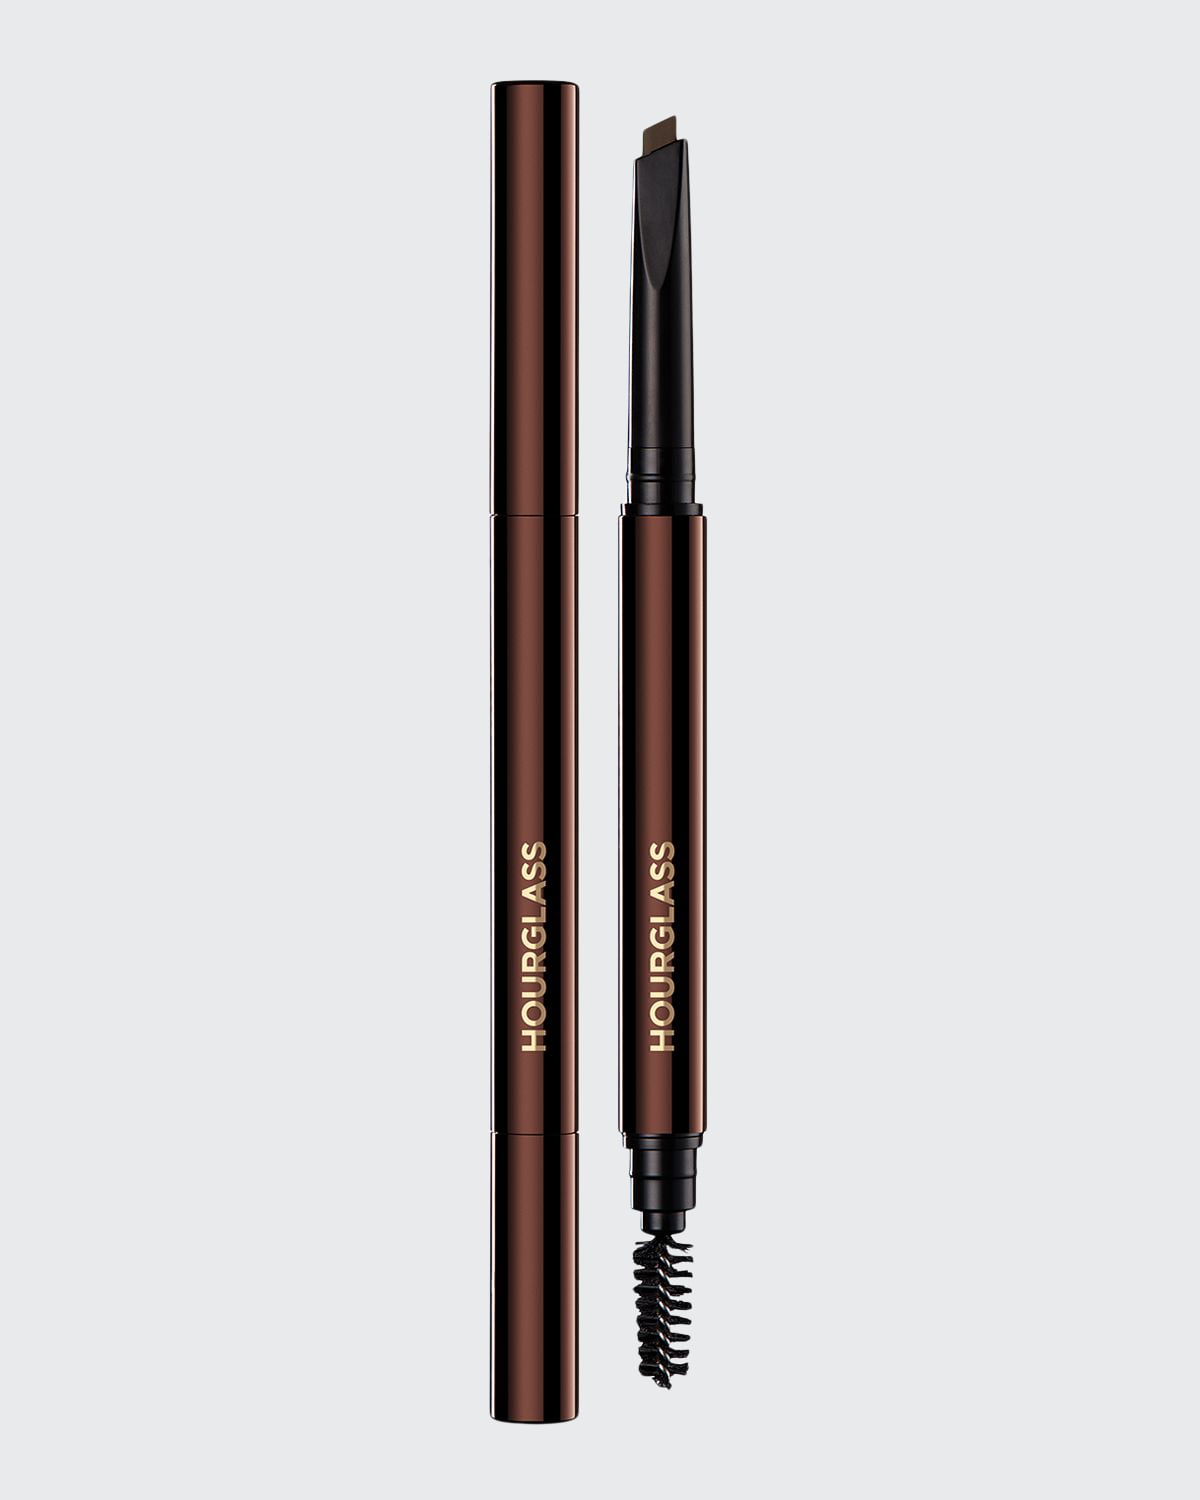 Hourglass Cosmetics Arch Brow Sculpting Pencil